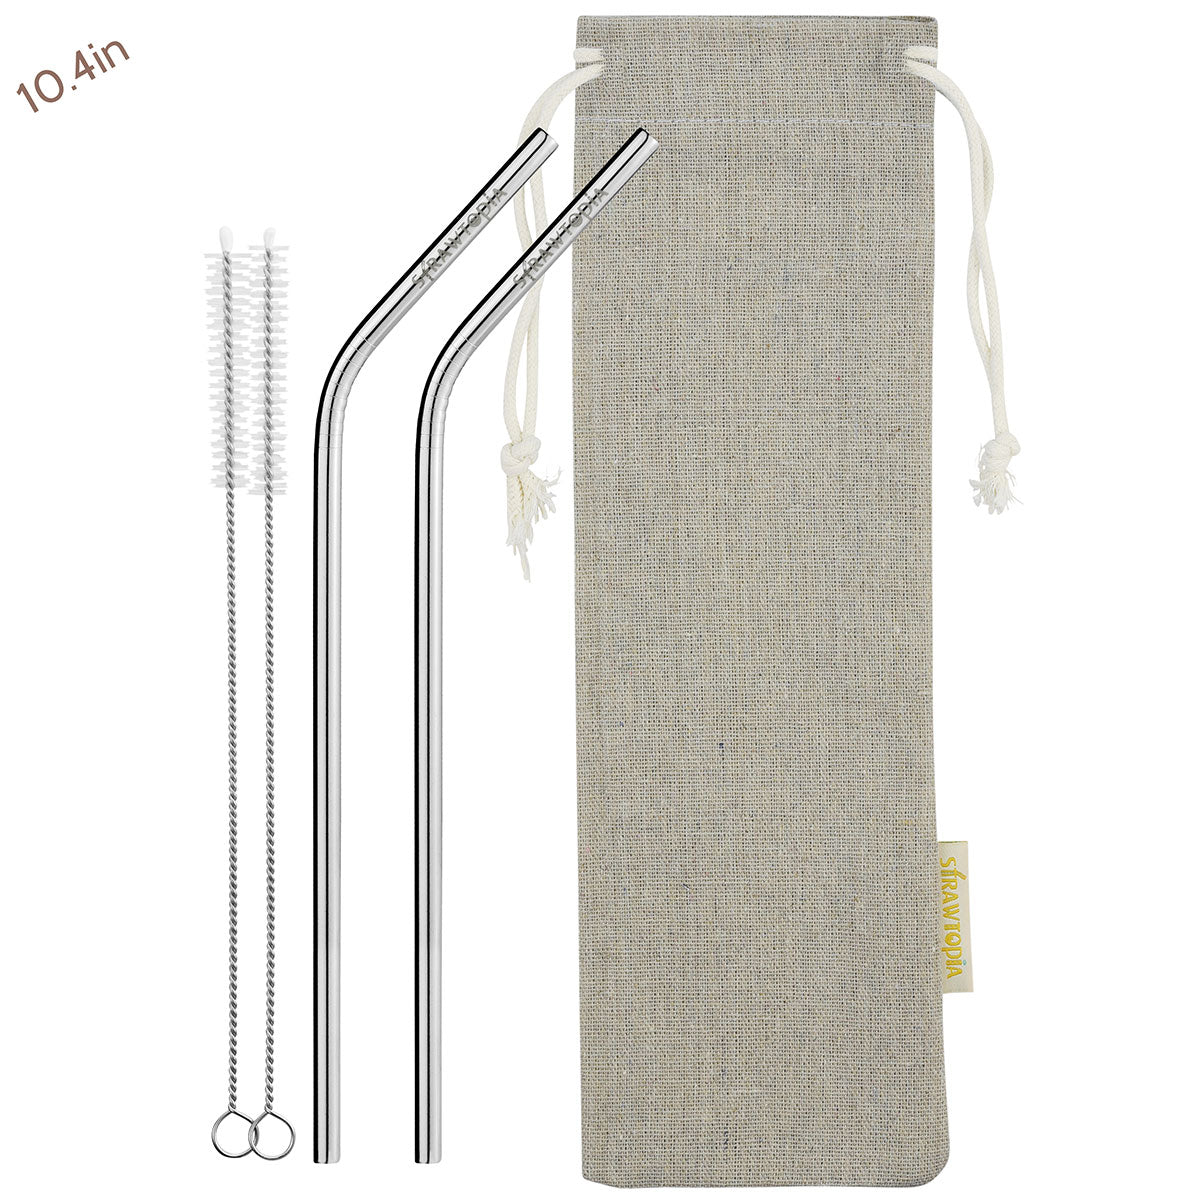 14 Piece Reusable Stainless Steel Metal Straws with Cleaning Brushes -  STRAWTOPIA